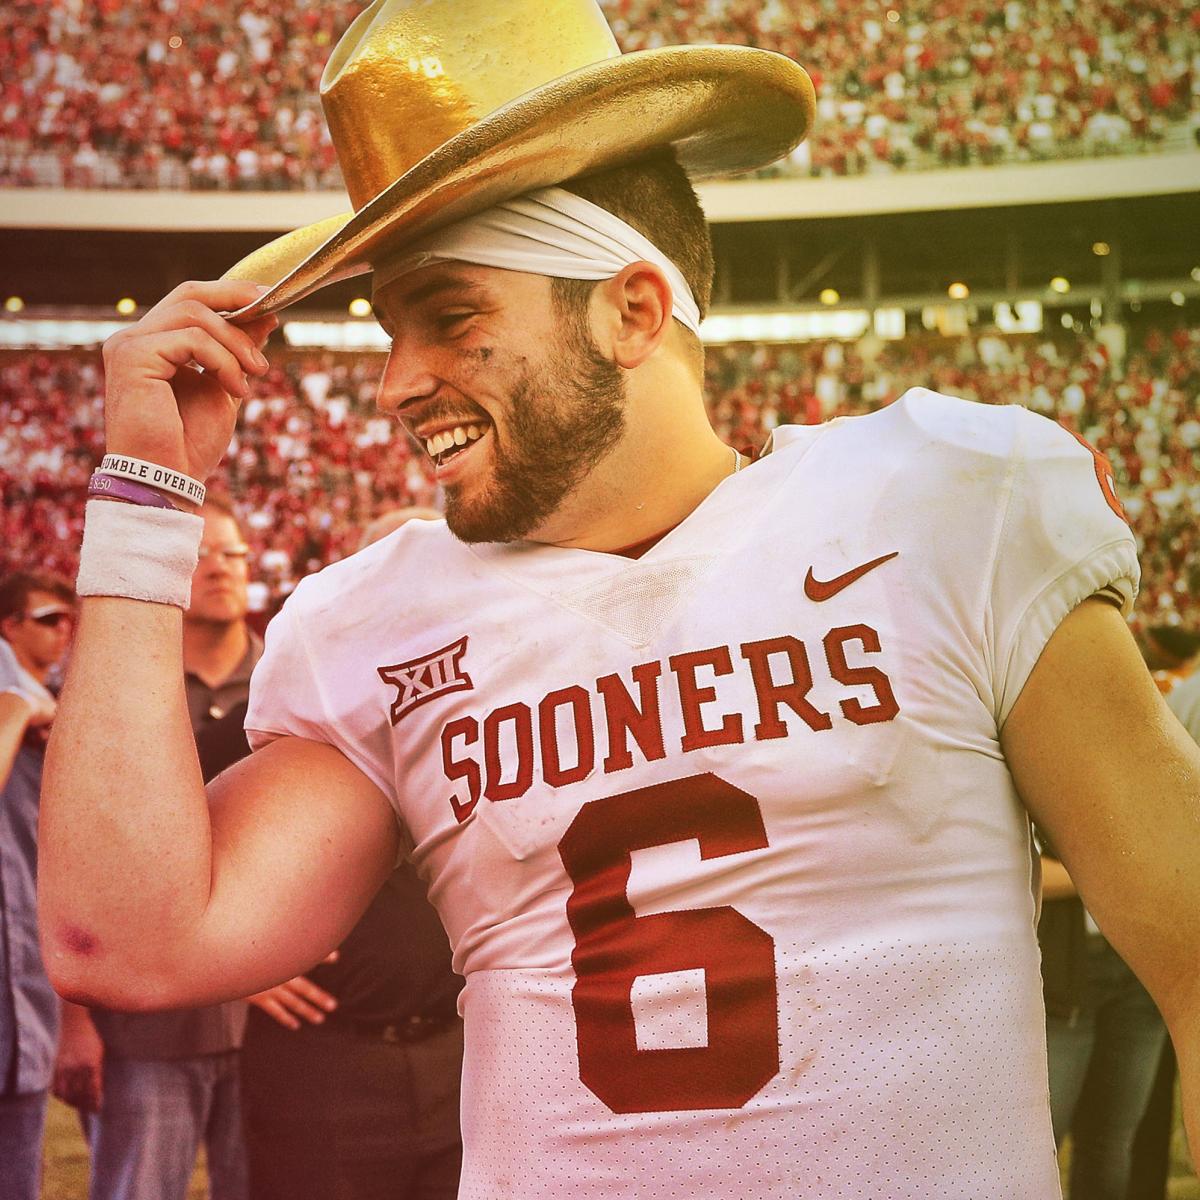 Baker Mayfield announces that he will wear jersey No. 6